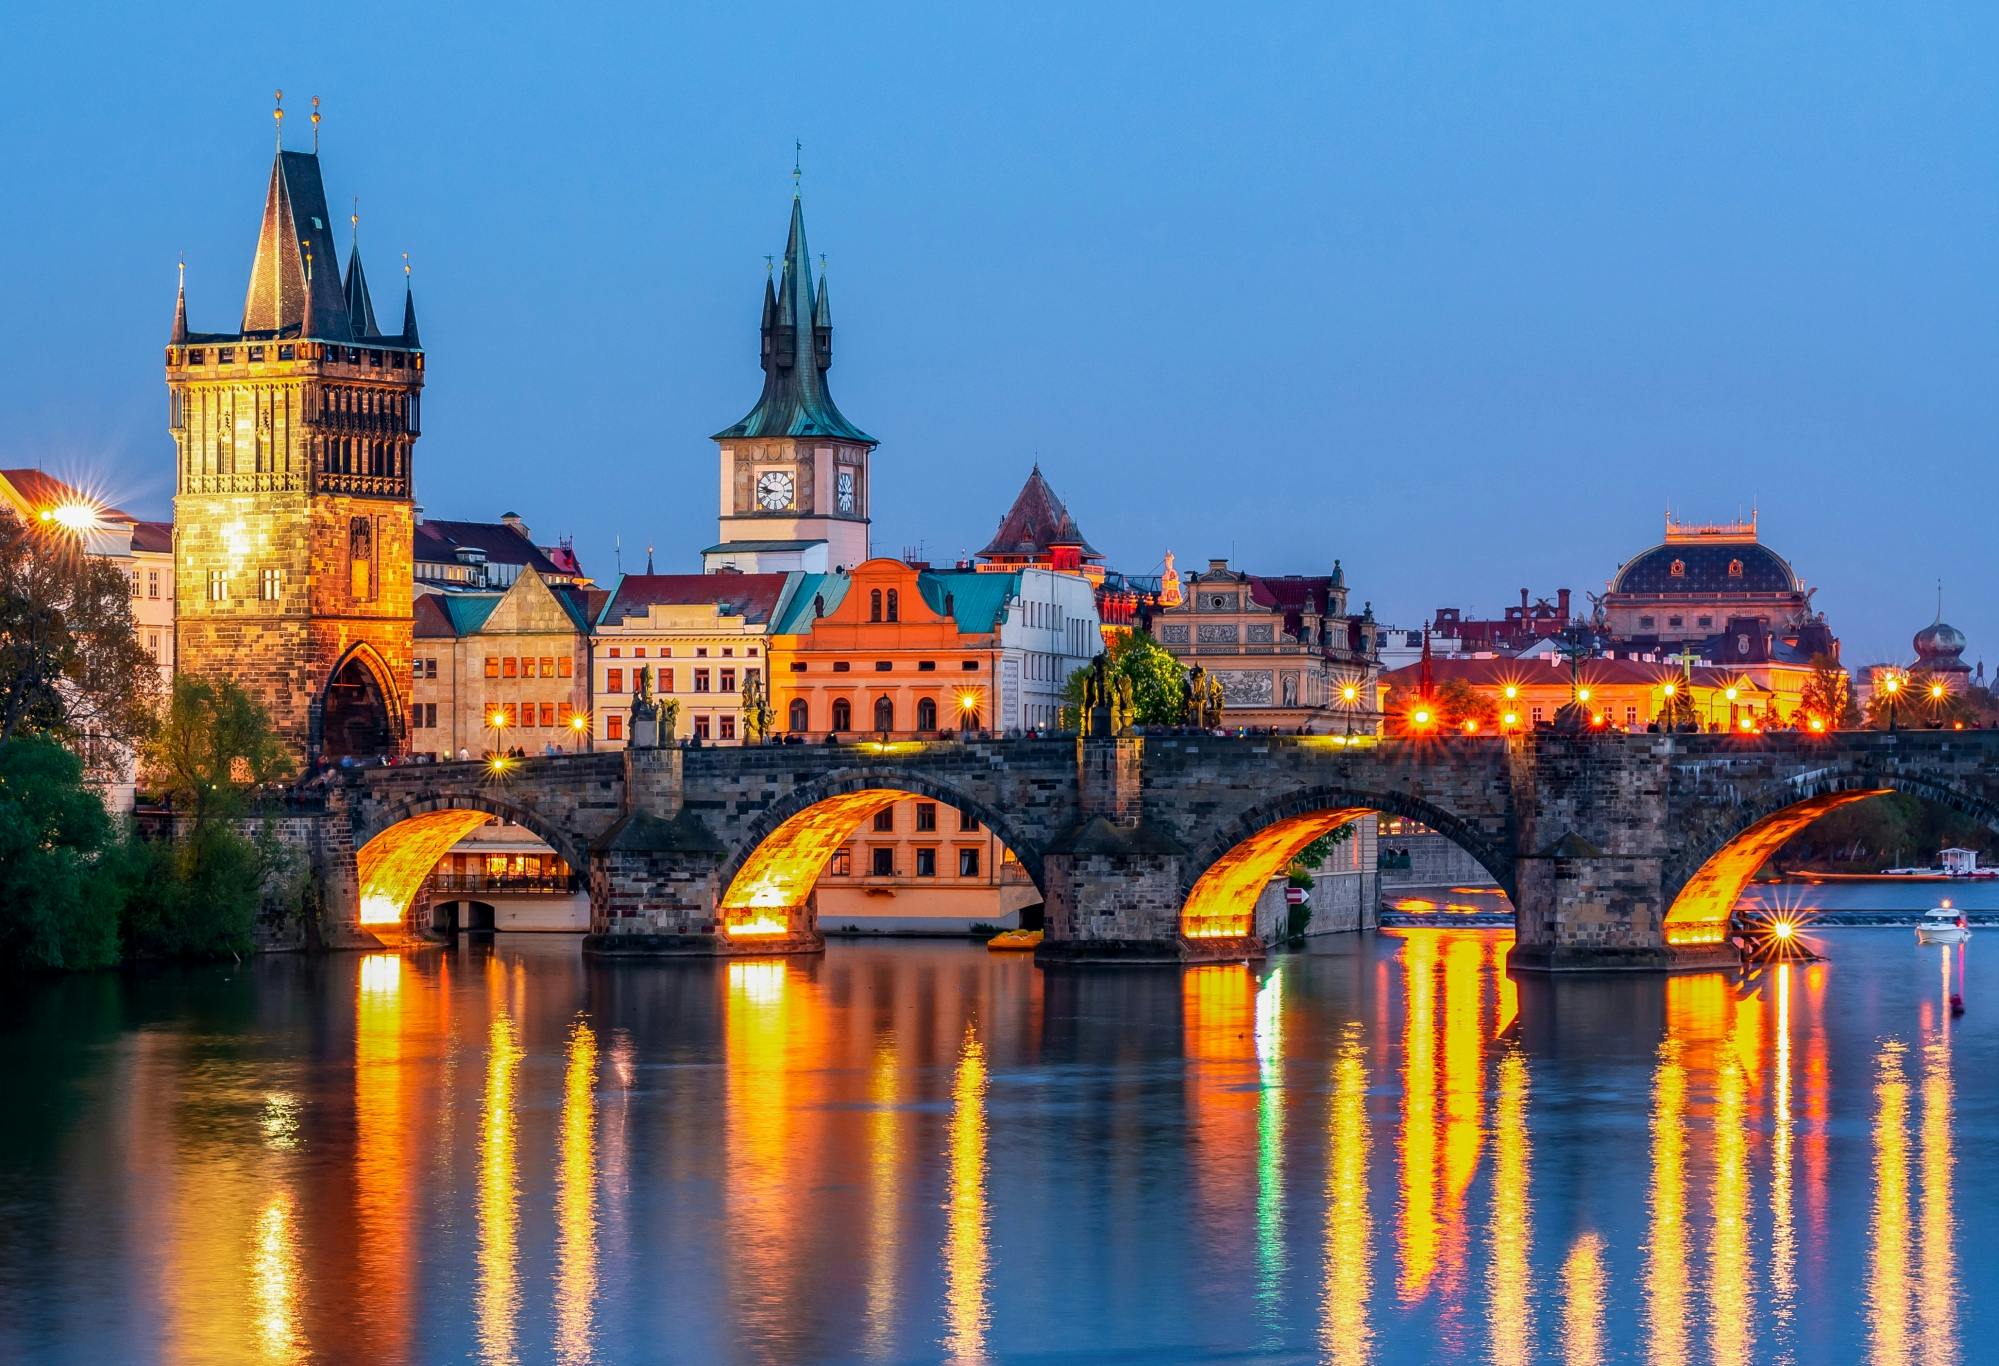 Cruise tour in Prague with dinner